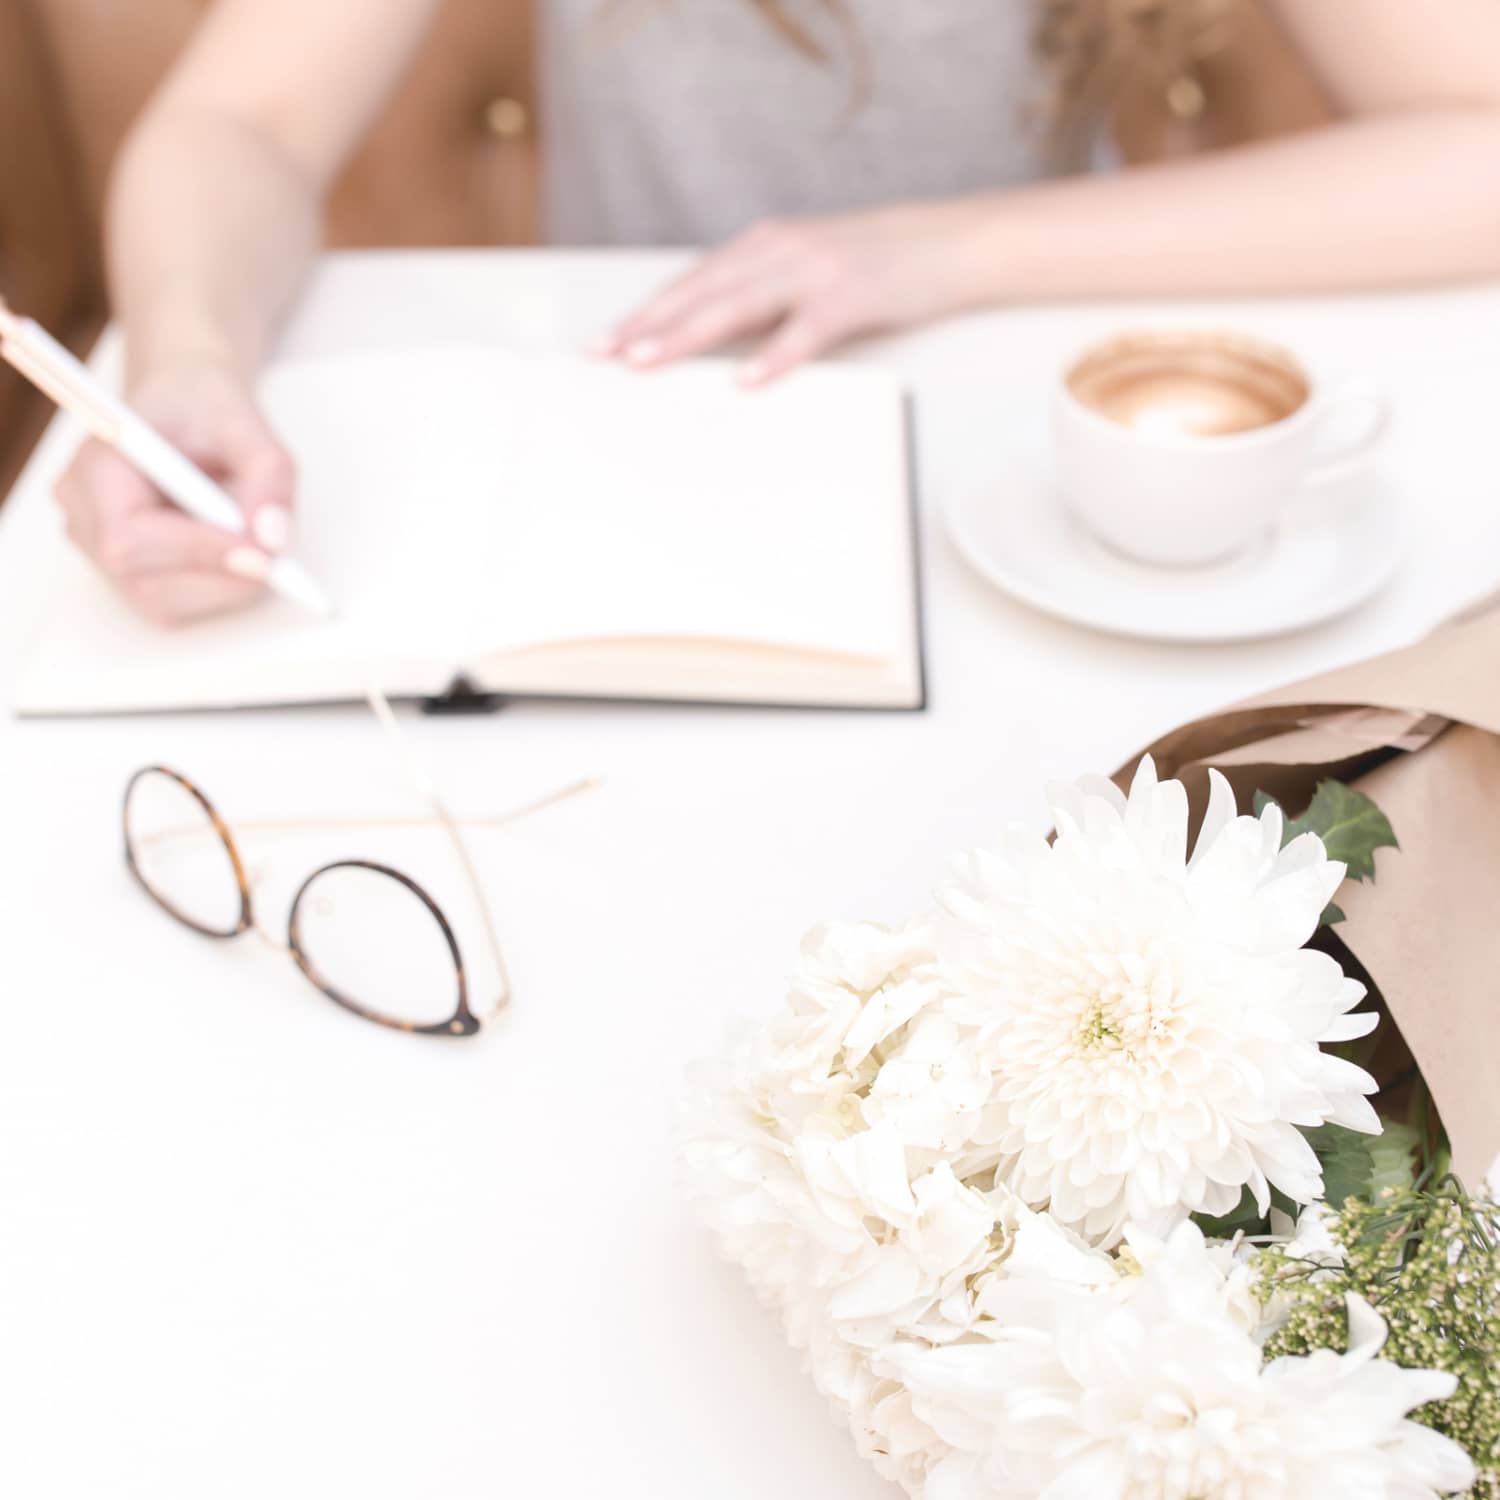 An image of a woman writing in a journal with a cup of coffee, a pair of glasses and a bouquet of white flowers laying on the table beside her.